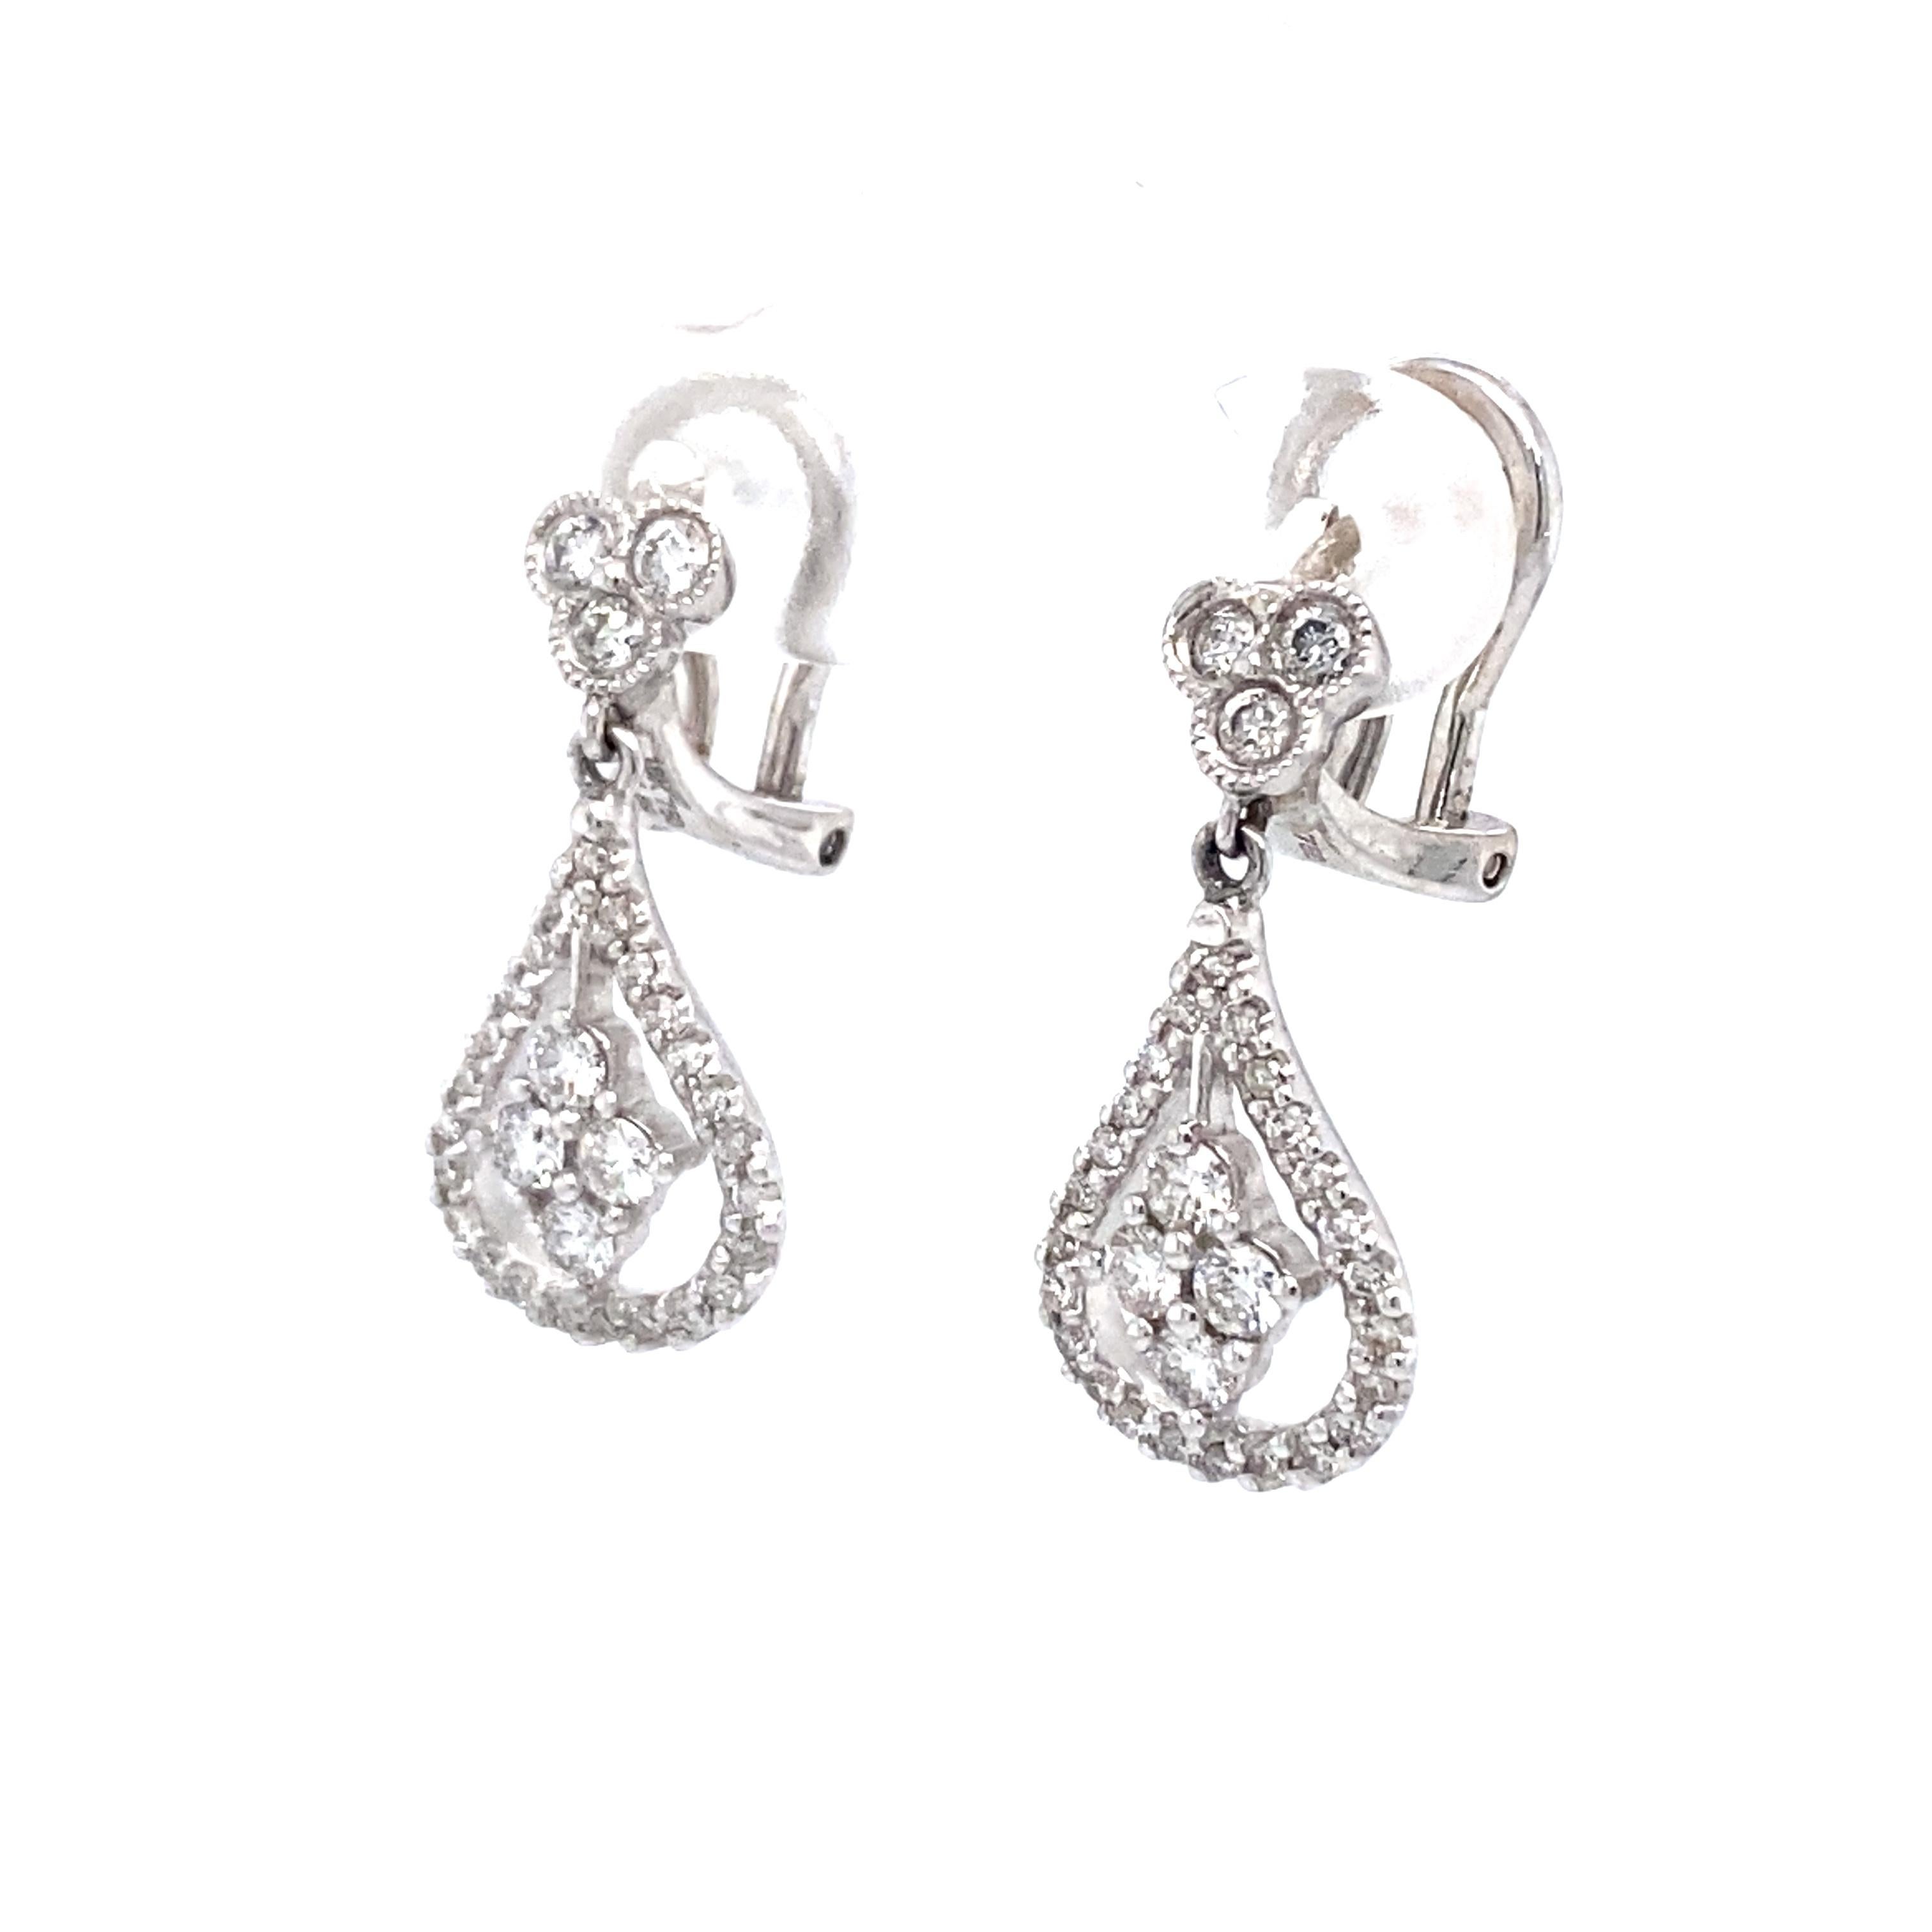 0.58 Carat Diamond Pear Shaped Dangle Earrings in 14 Karat White Gold In Excellent Condition For Sale In Atlanta, GA